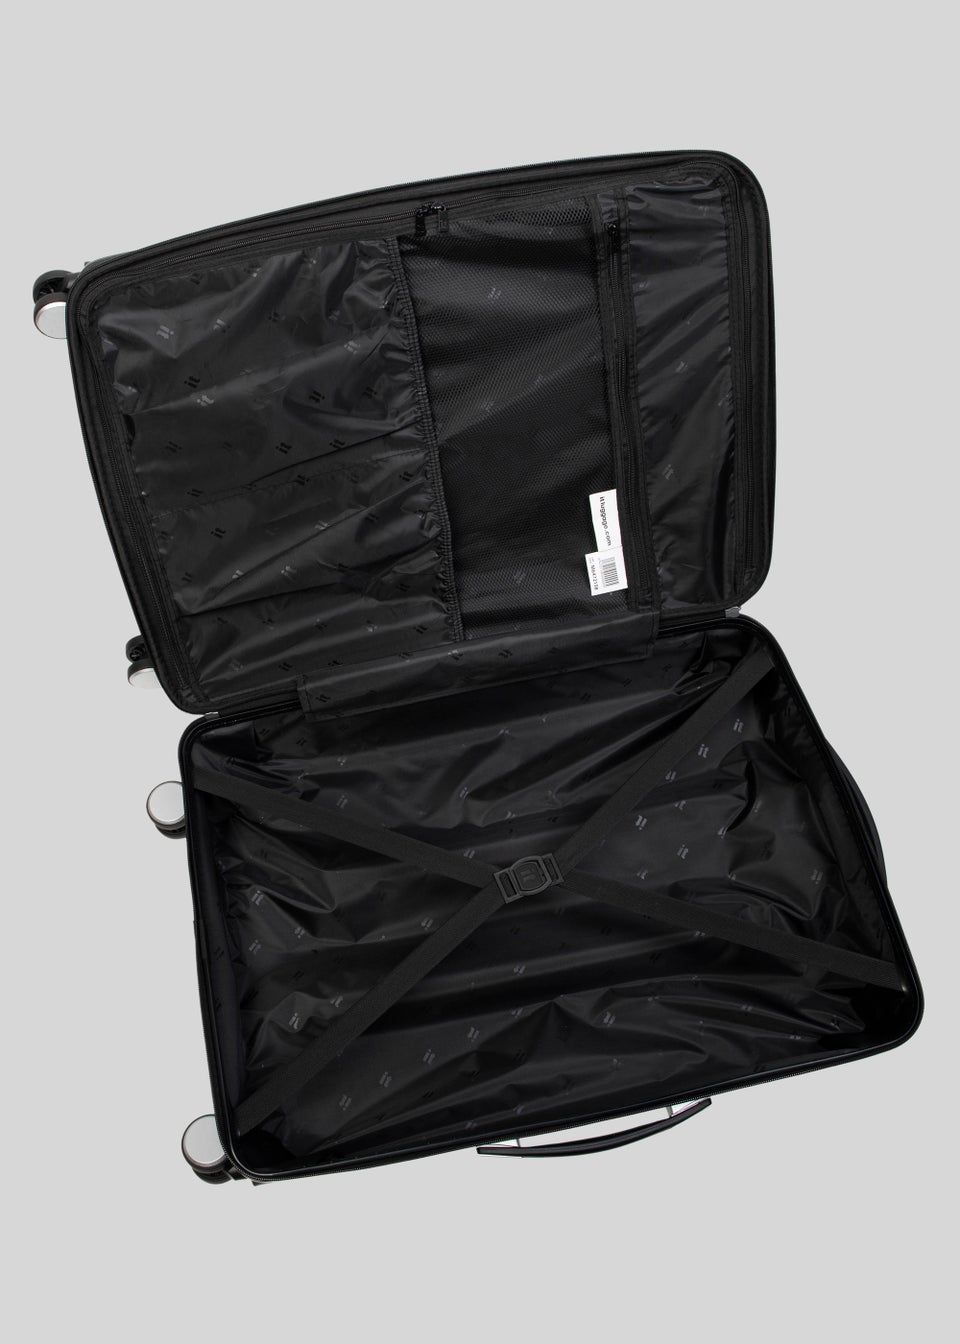 IT Luggage Silver Wave Suitcase